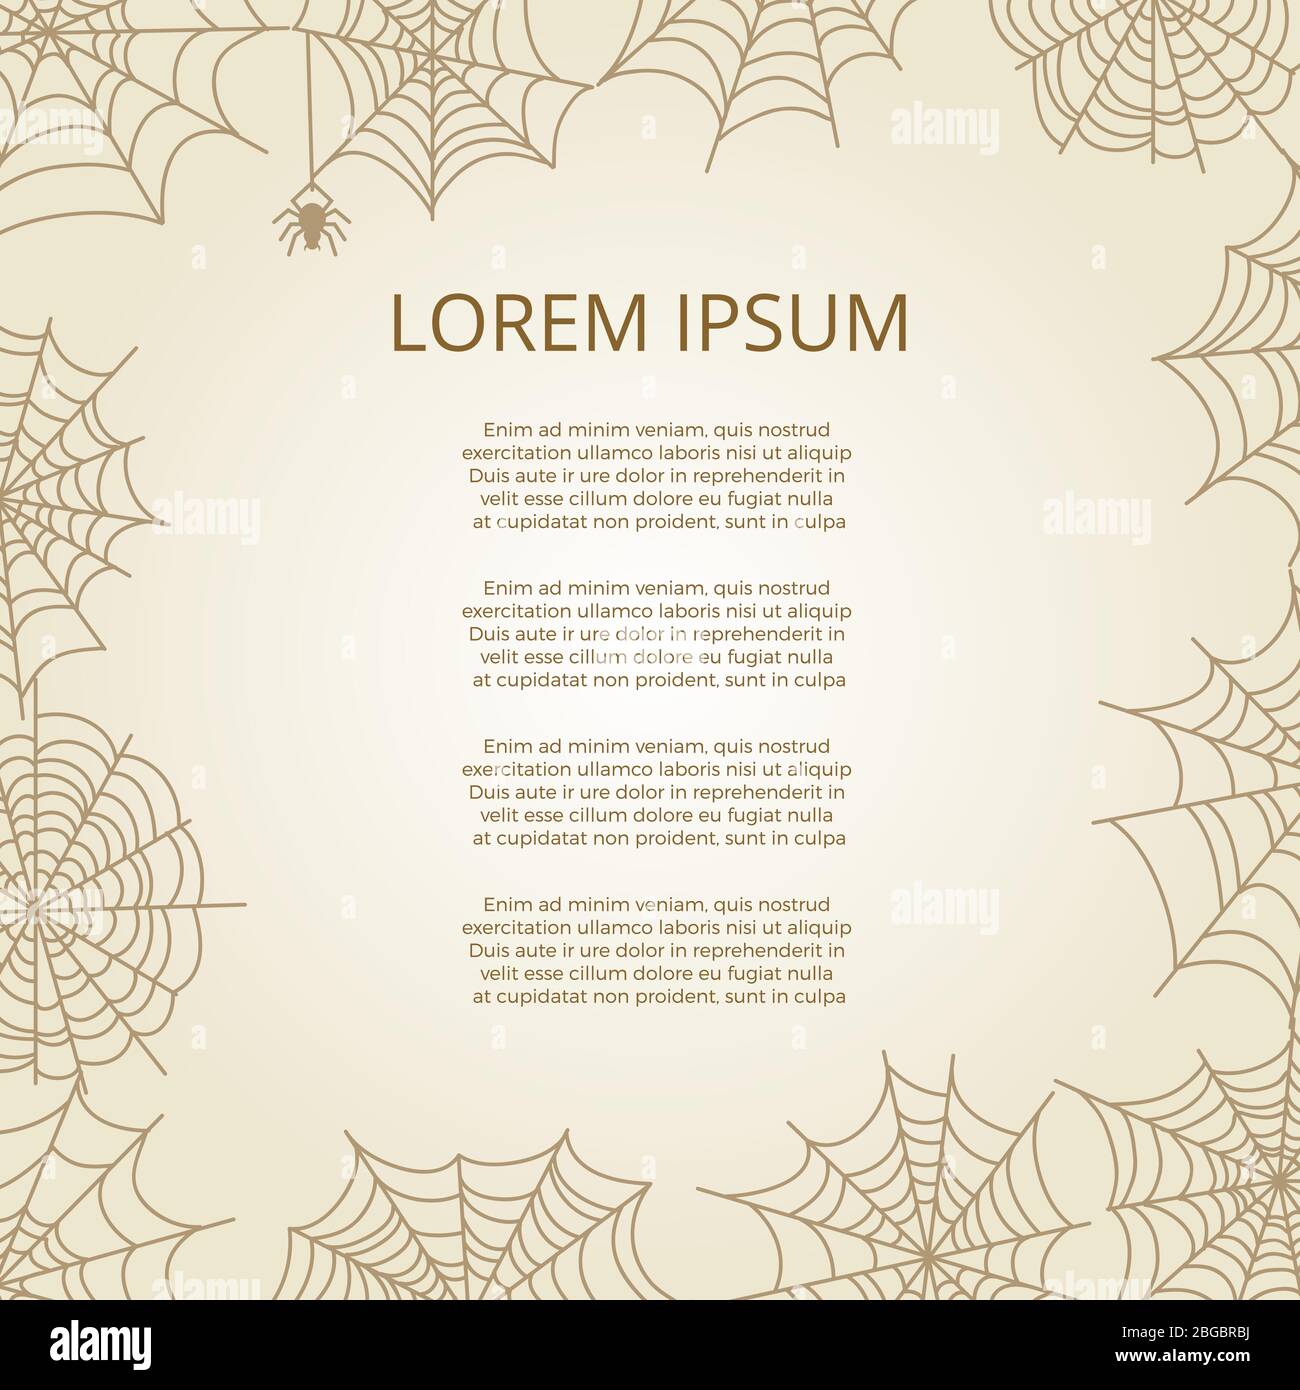 Vintage banner poster with spider and cobweb frame. Vector illustration Stock Vector